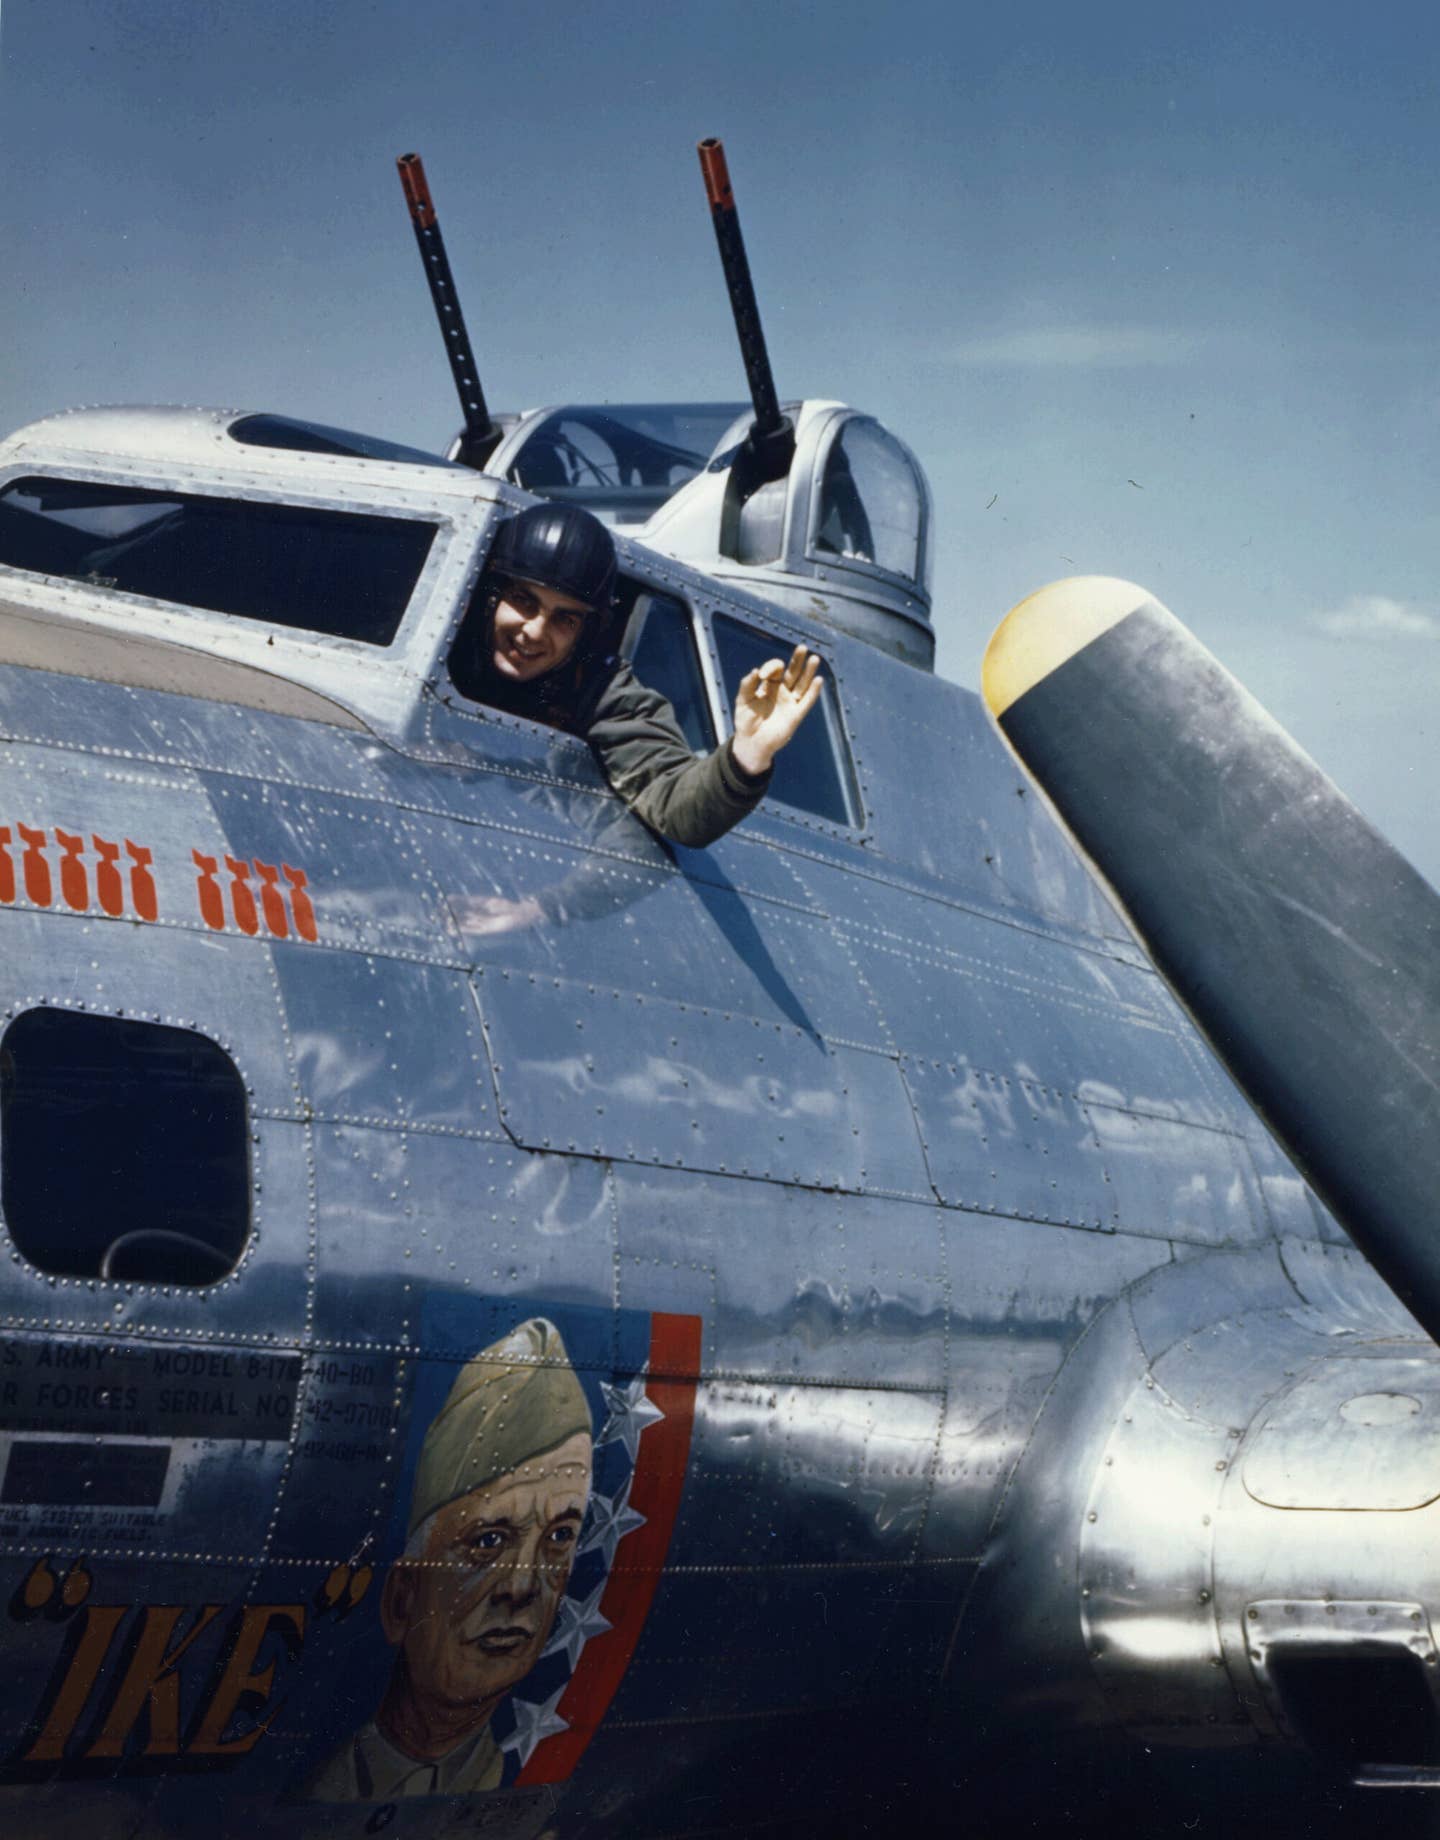 1st Lt. George H. Heilig waves and gives the okay sign from the cockpit of the <em>General Ike</em>, a B-17 from the 401st Bomb Squadron, 91st Bomb Group, Eighth Air Force, England, circa 1944. <em>Photo by PhotoQuest/Getty Images</em>